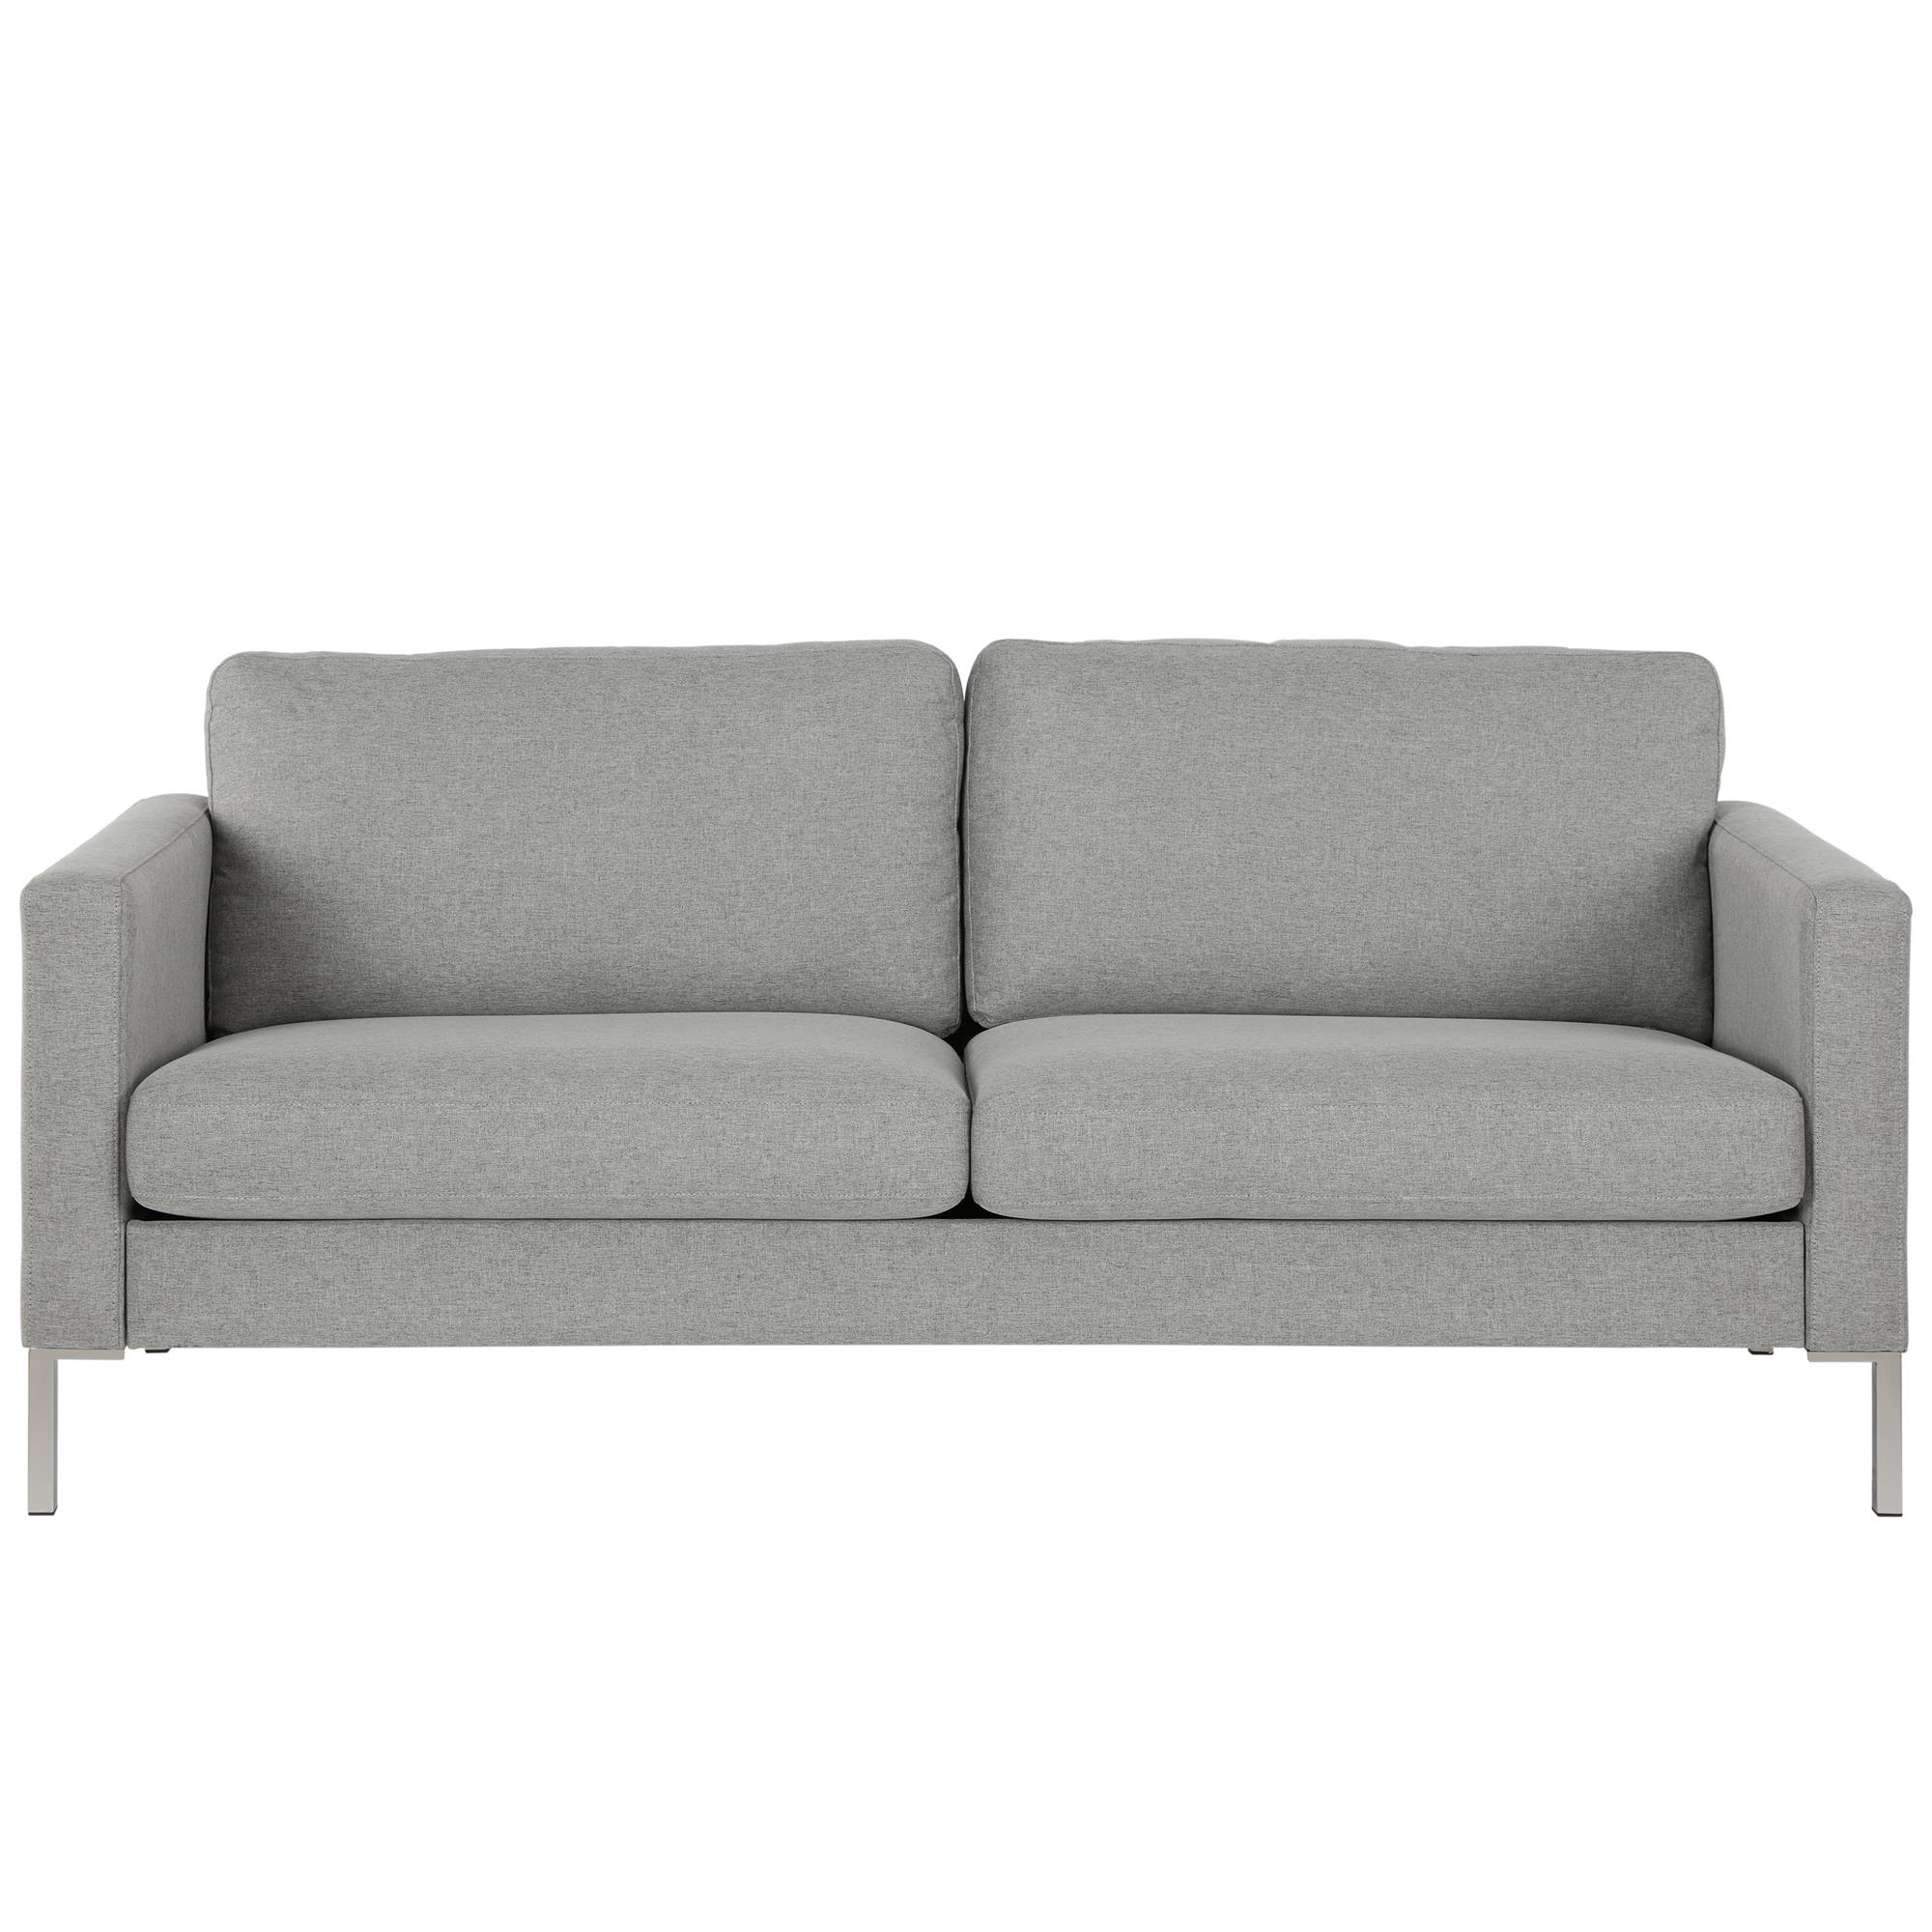 DHP Lexington Modern Sofa & Couch, Living Room Furniture, Gray Linen - image 4 of 15